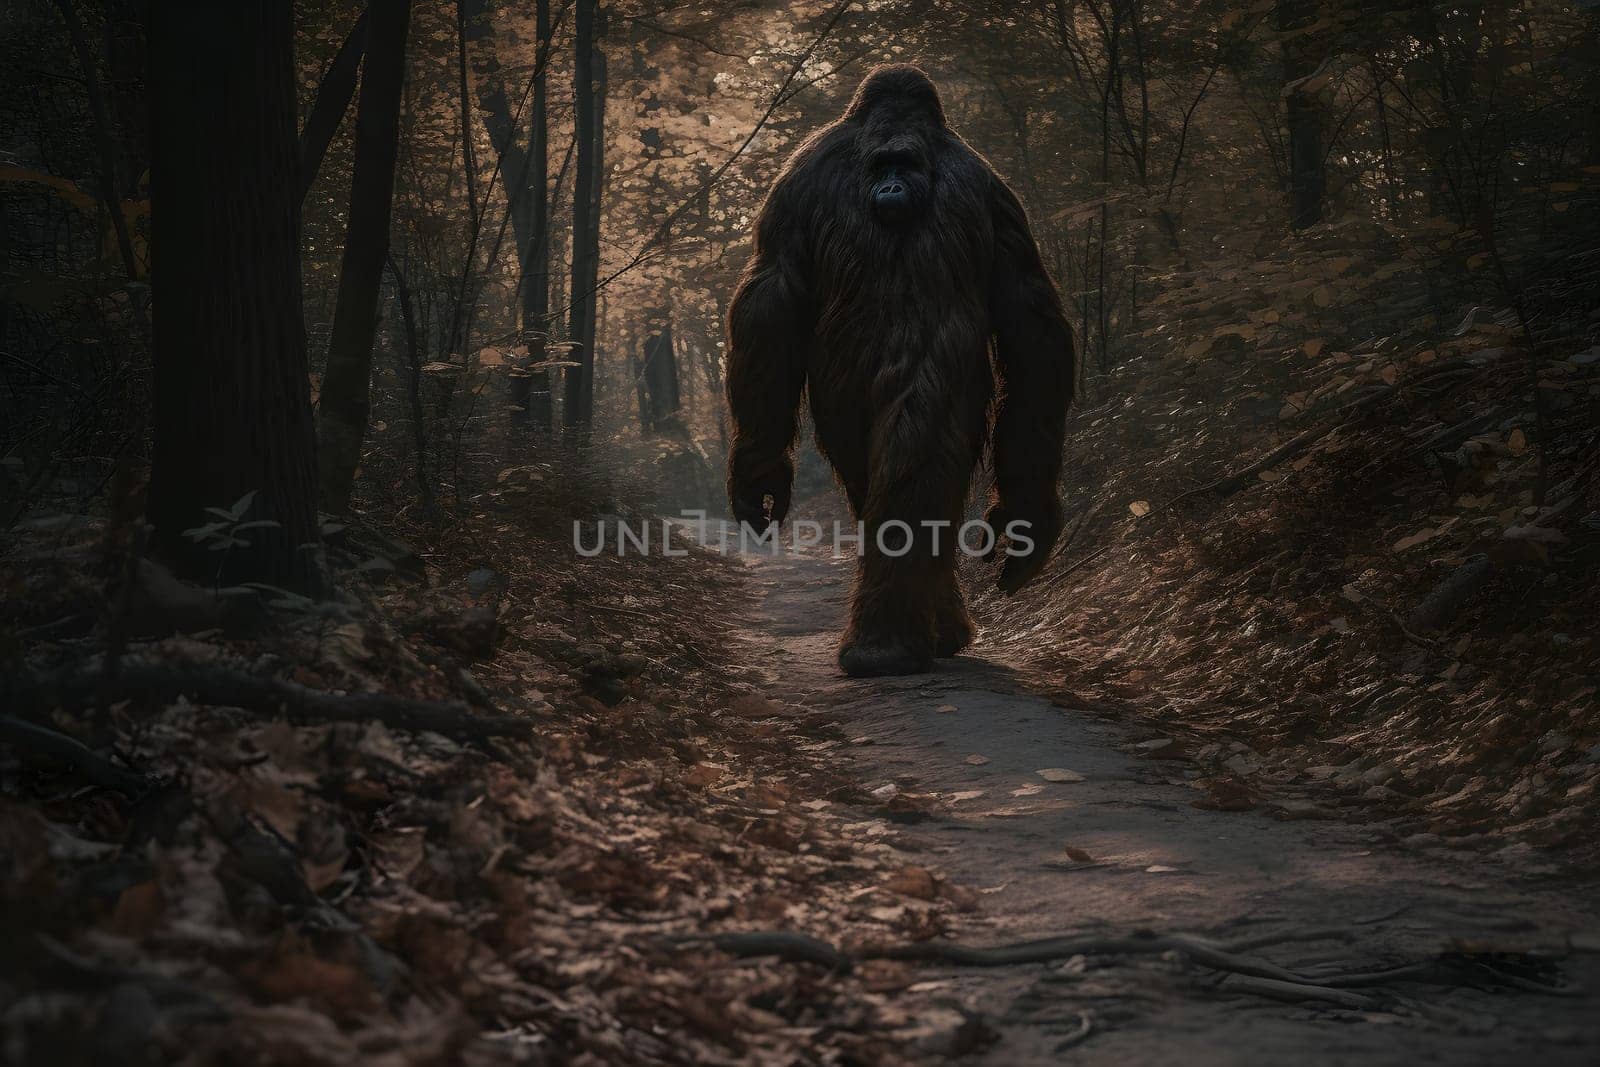 bigfoot in the woods walking at day time, neural network generated photorealistic image by z1b